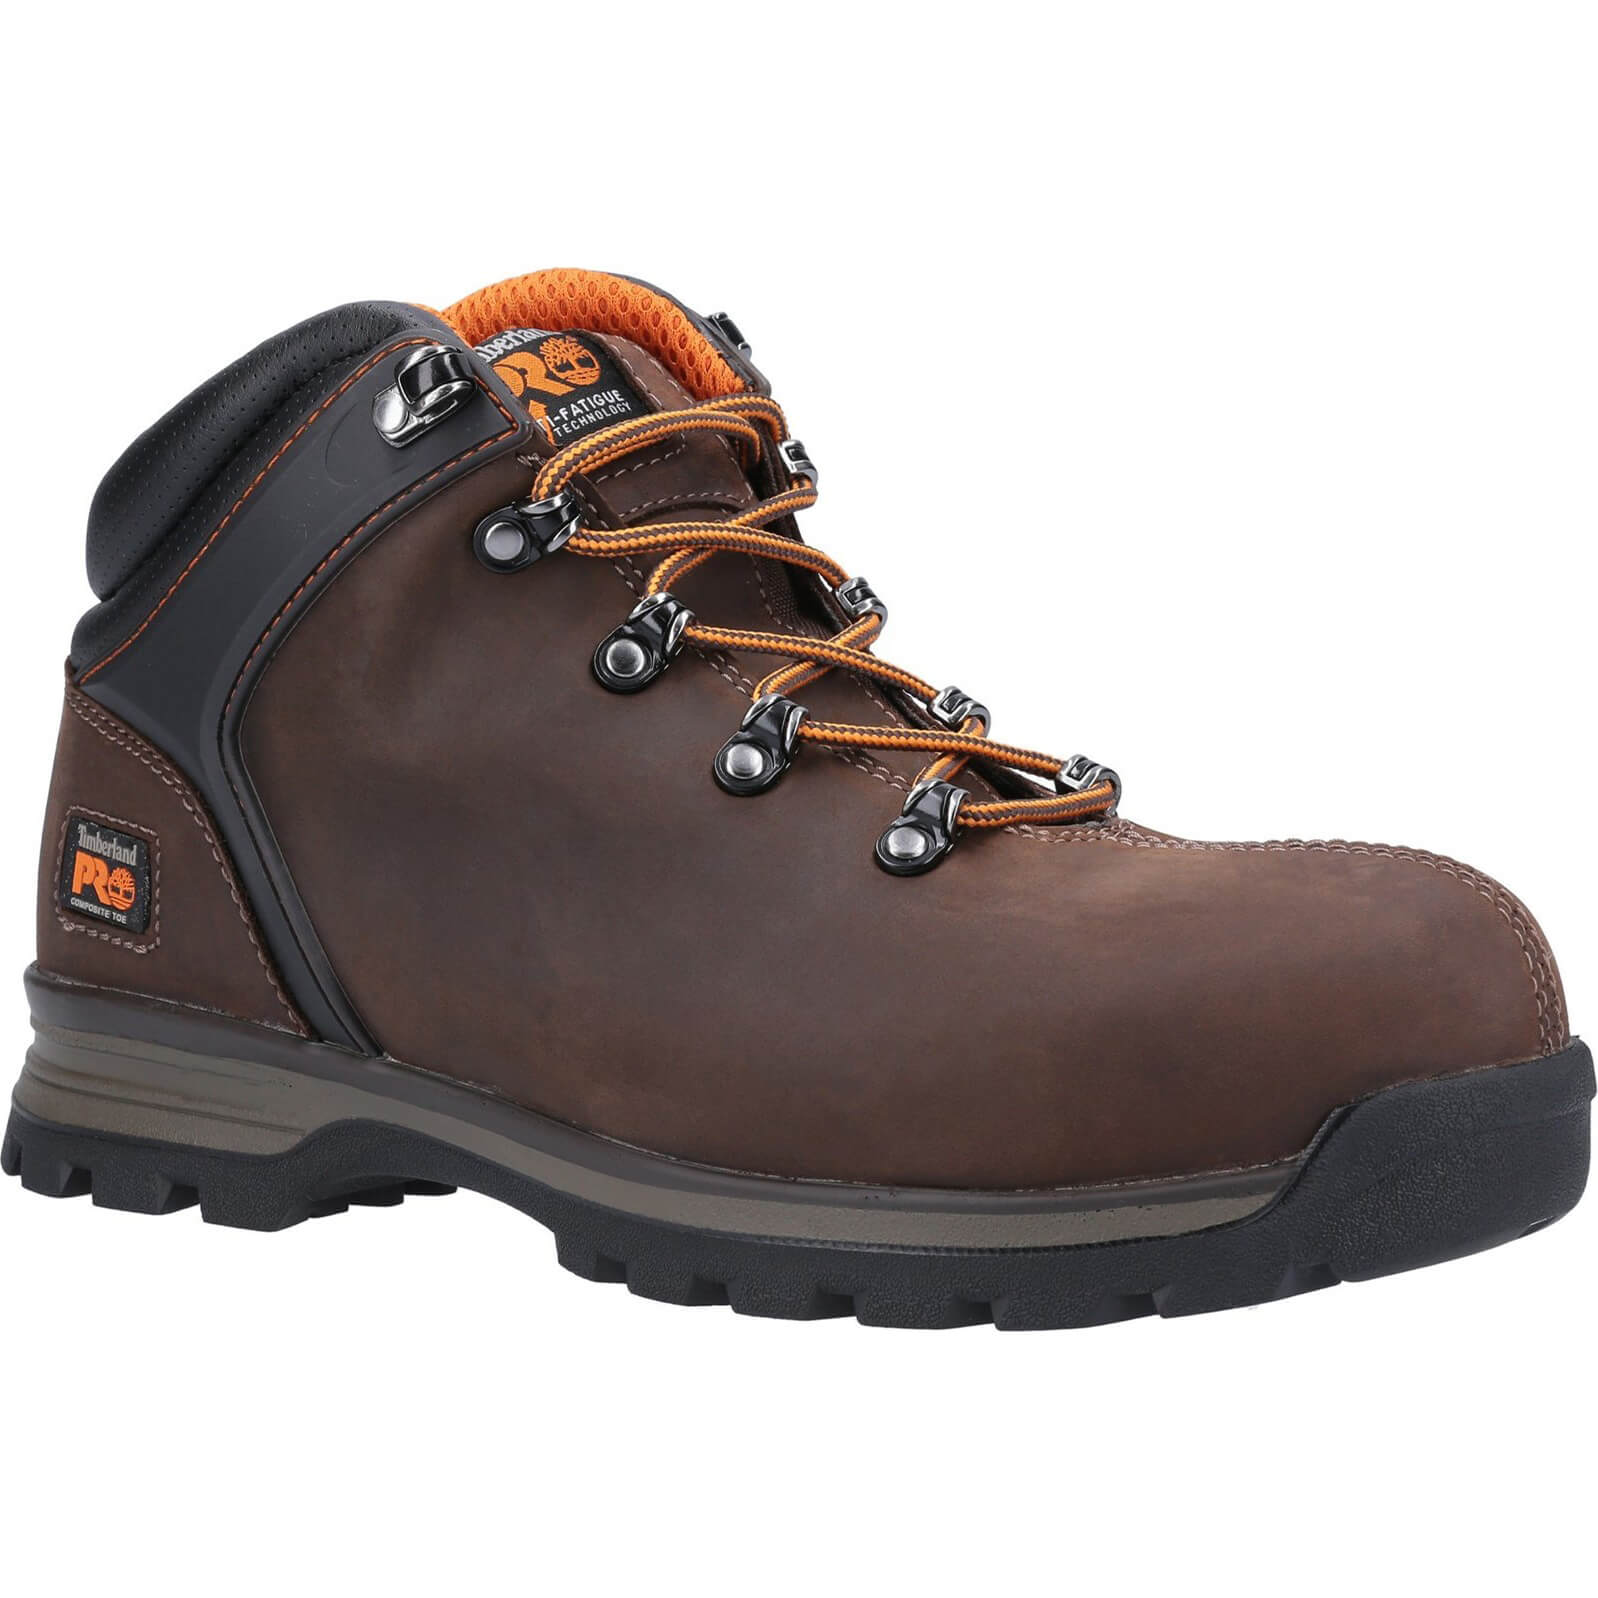 Image of Timberland Pro Splitrock XT Composite Safety Toe Work Boot Brown Size 9